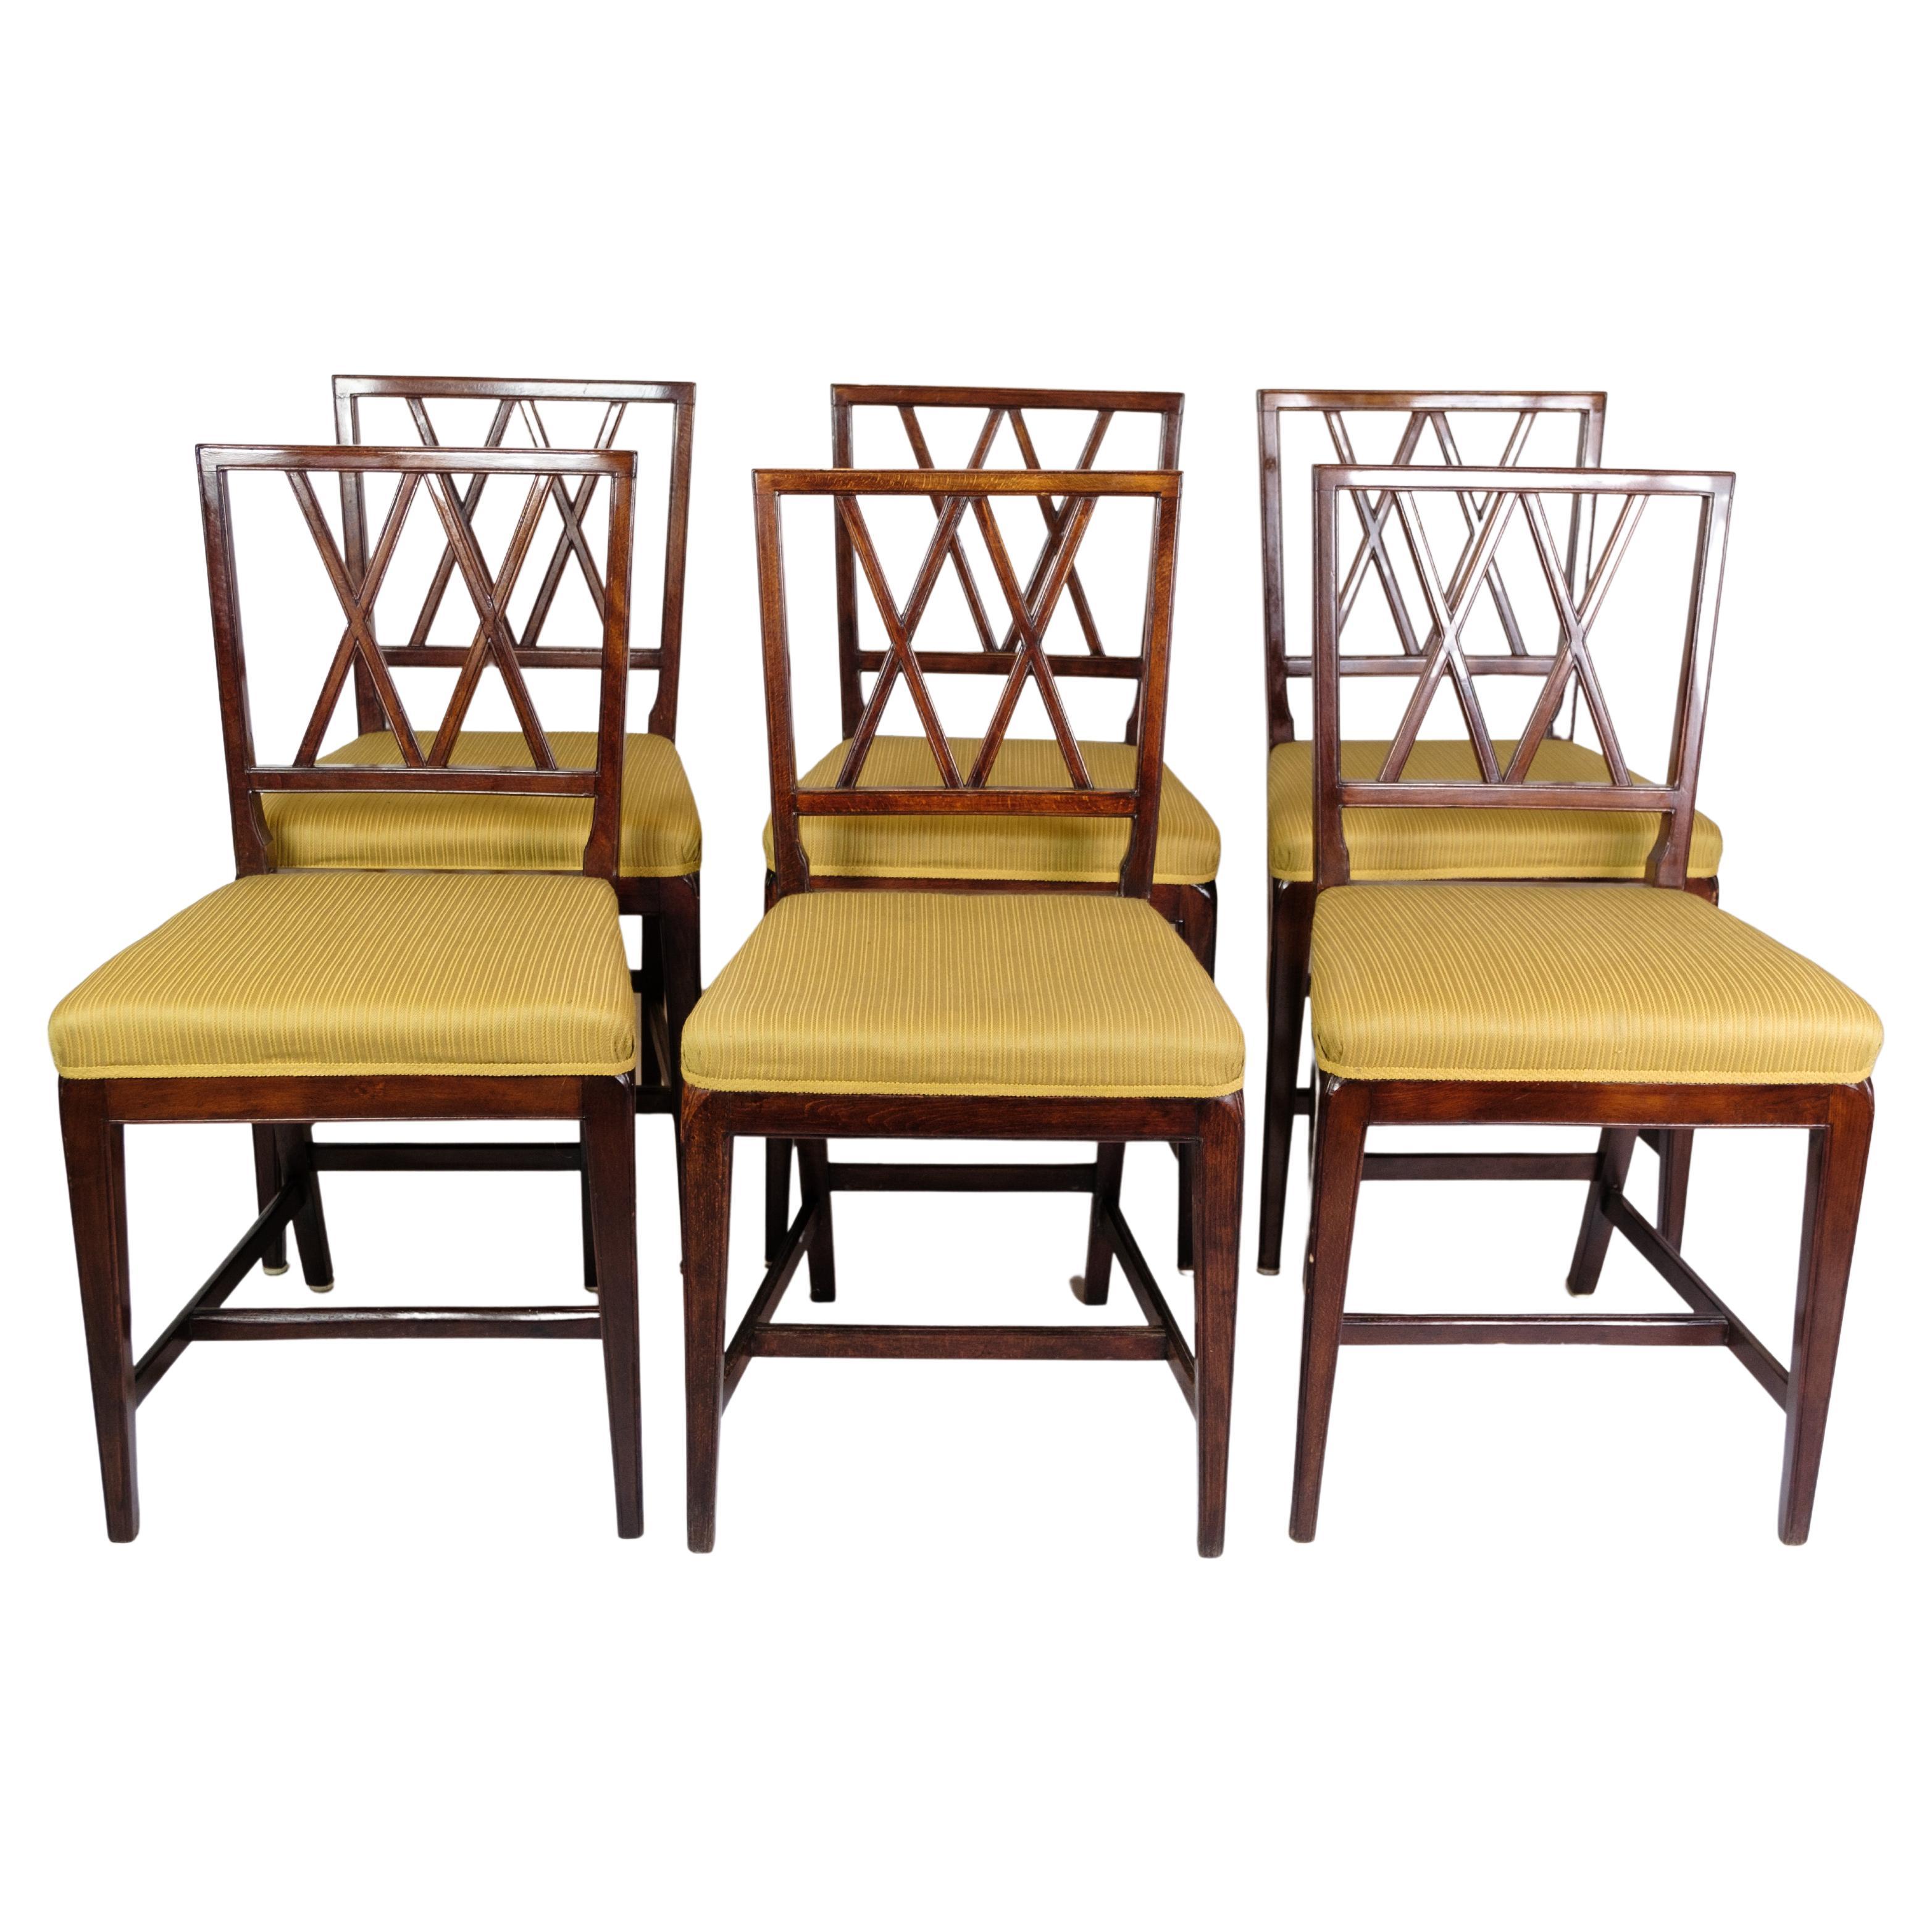 Set of six Dining Chairs by Ole Wanscher for A.J. Iversen from 1950s.